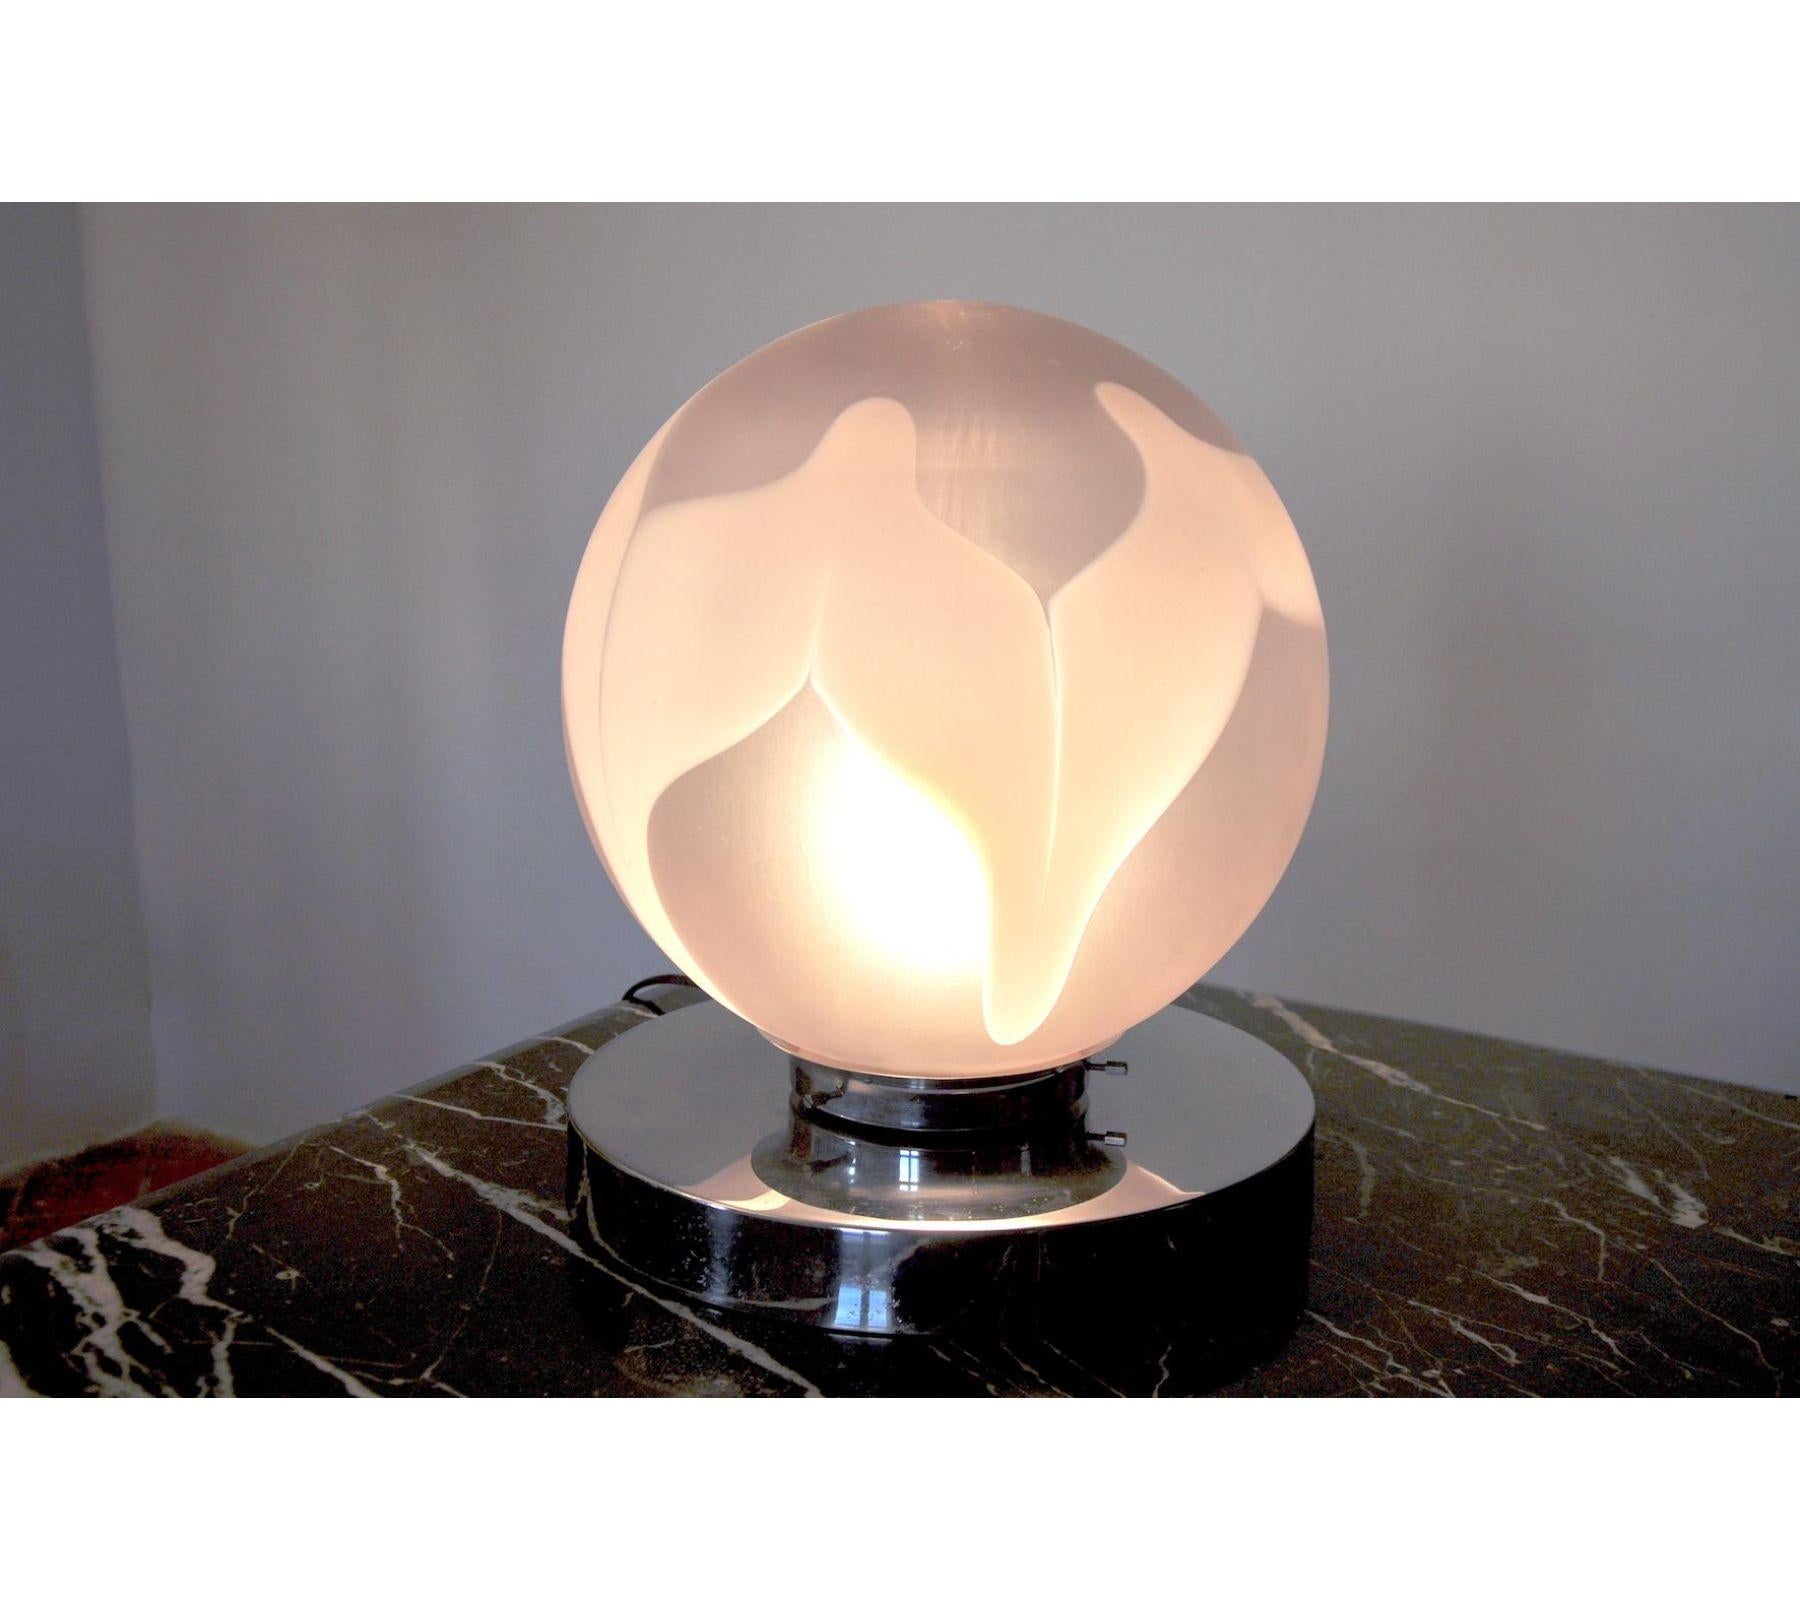 Superb Toni Zuccheri table lamp, incredible proportion of the bicolore murano globe. A unique object of design that will be great a highlight to your interior project. Object in mint conditions. Electricity verified by our team. Shipping under best